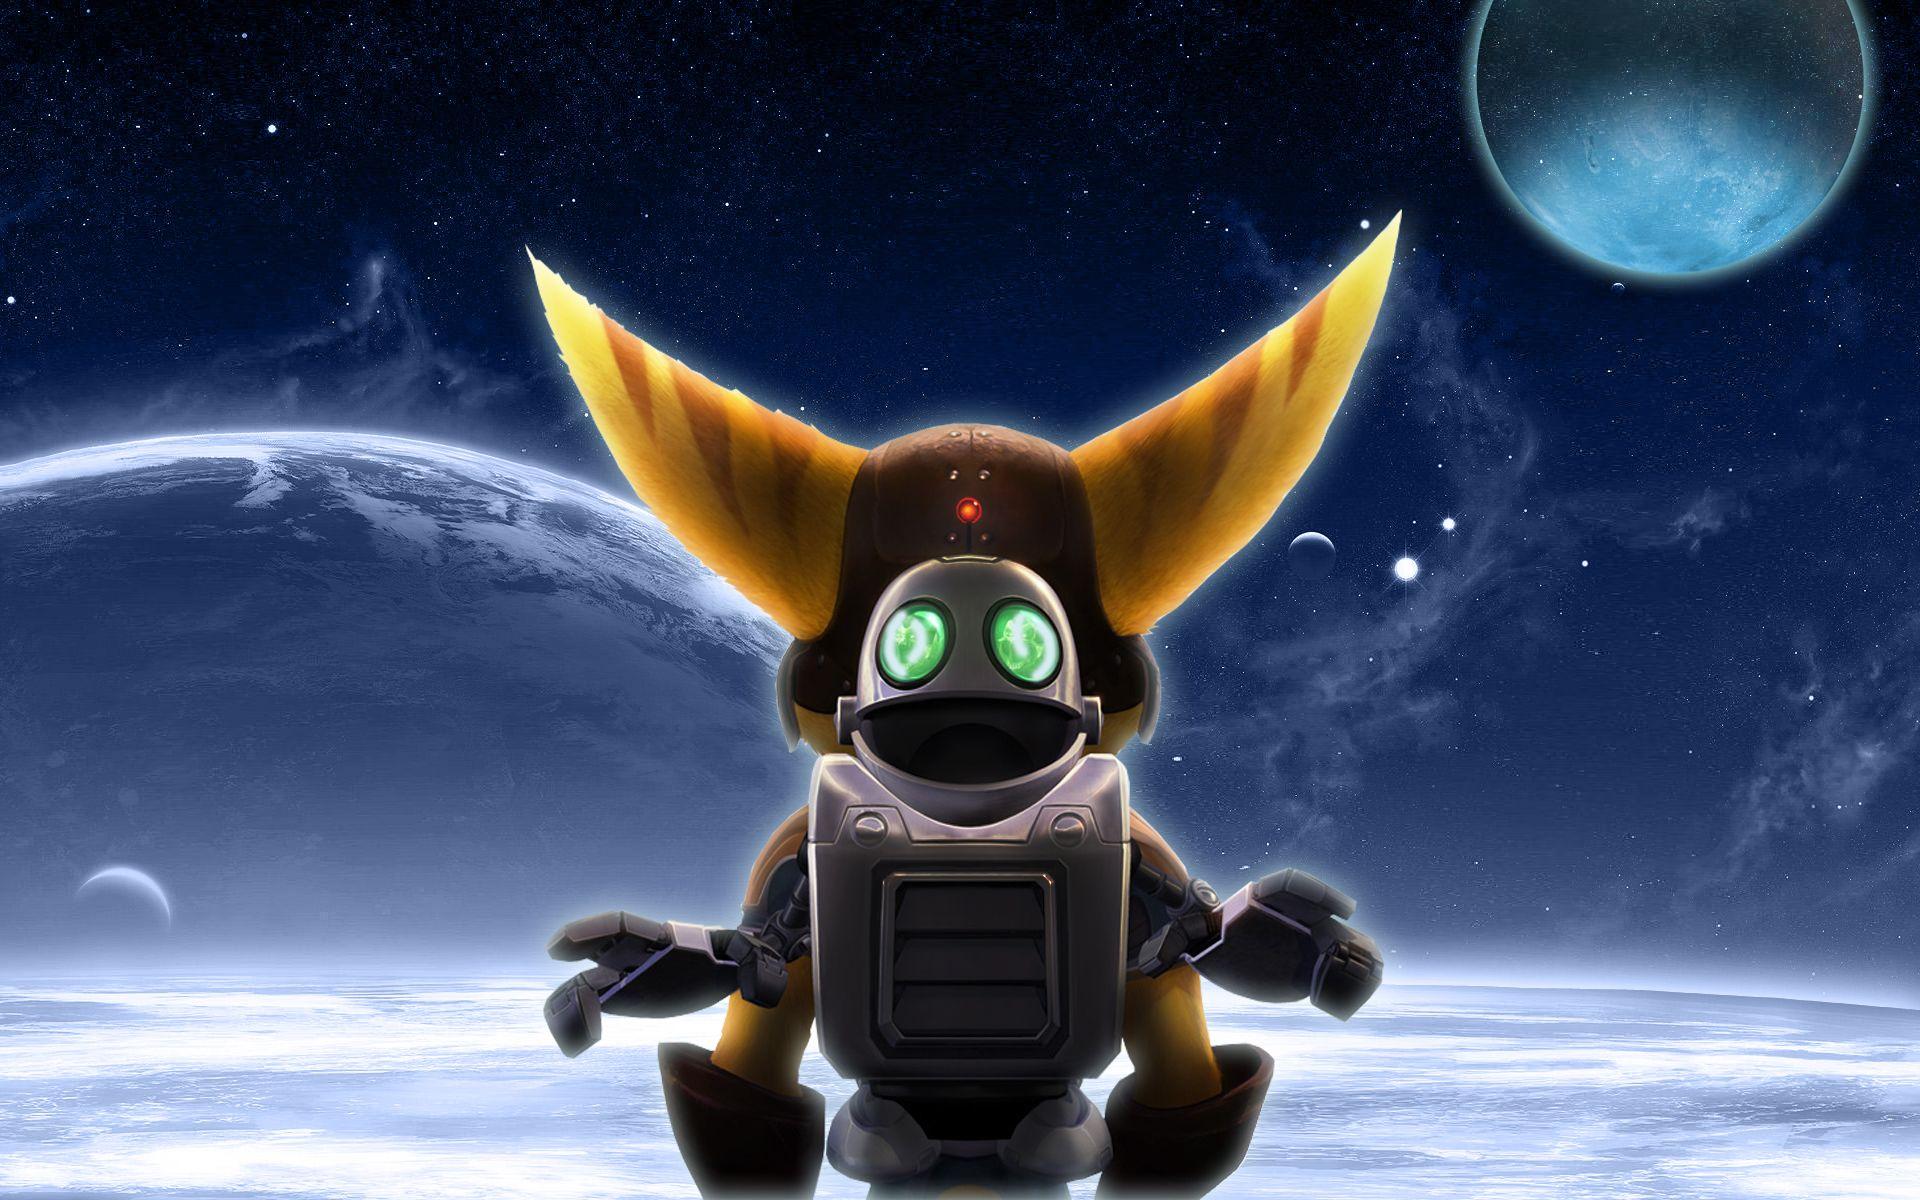 Miscellaneous of the Ratchet & Clank saga